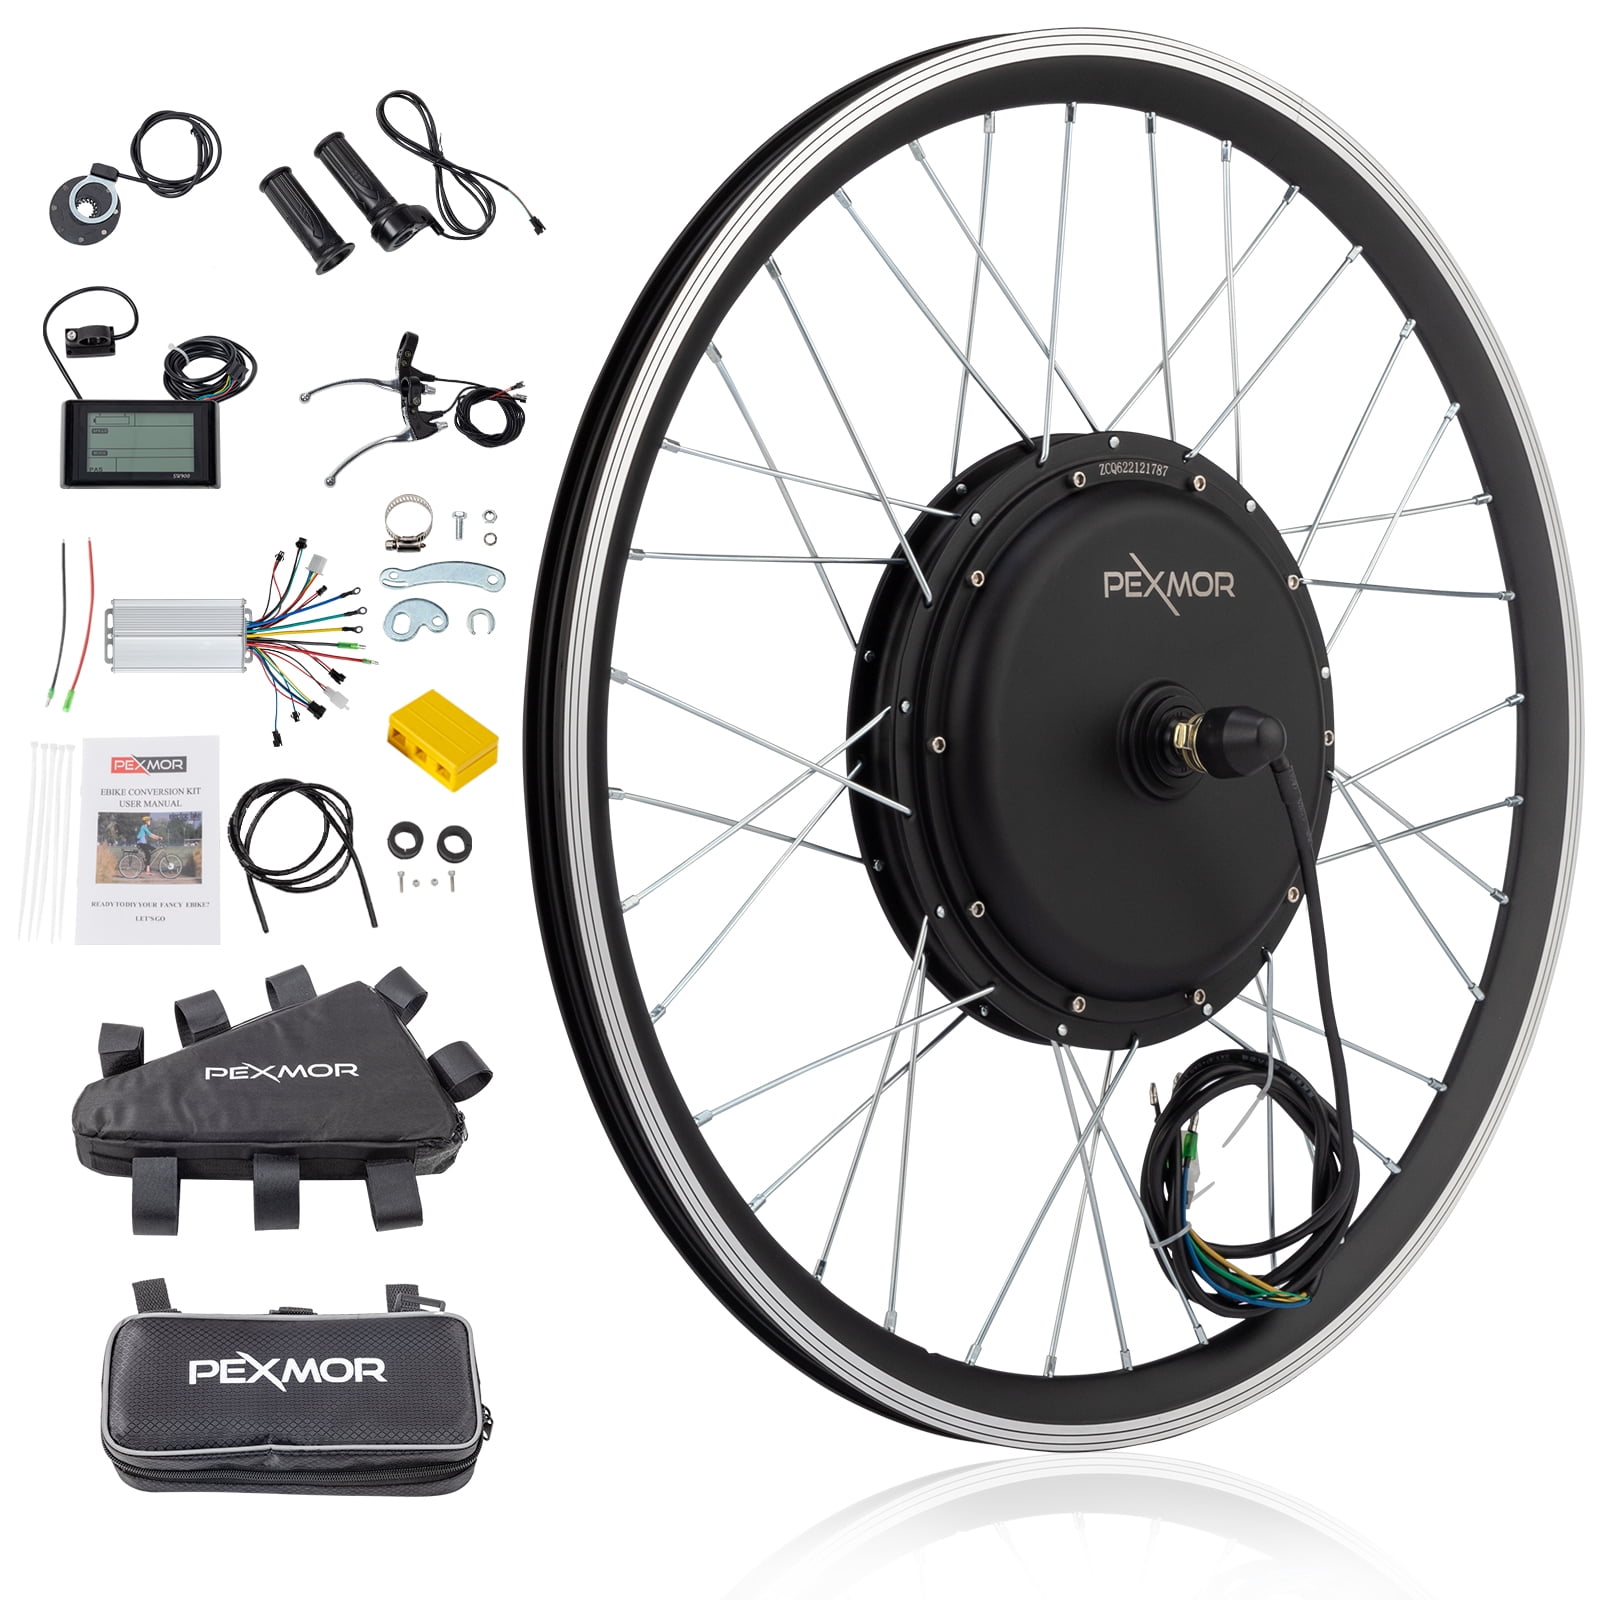 PEXMOR Electric Bike Conversion Kit, 48V 1200W 26 Front Wheel E-Bike  Conversion Kit, Ebike Hub Motor Kit Upgrade 3 Mode Controller w/PAS/LCD  Display/Twist Throttle Electric Bicycle Ebike Kit 